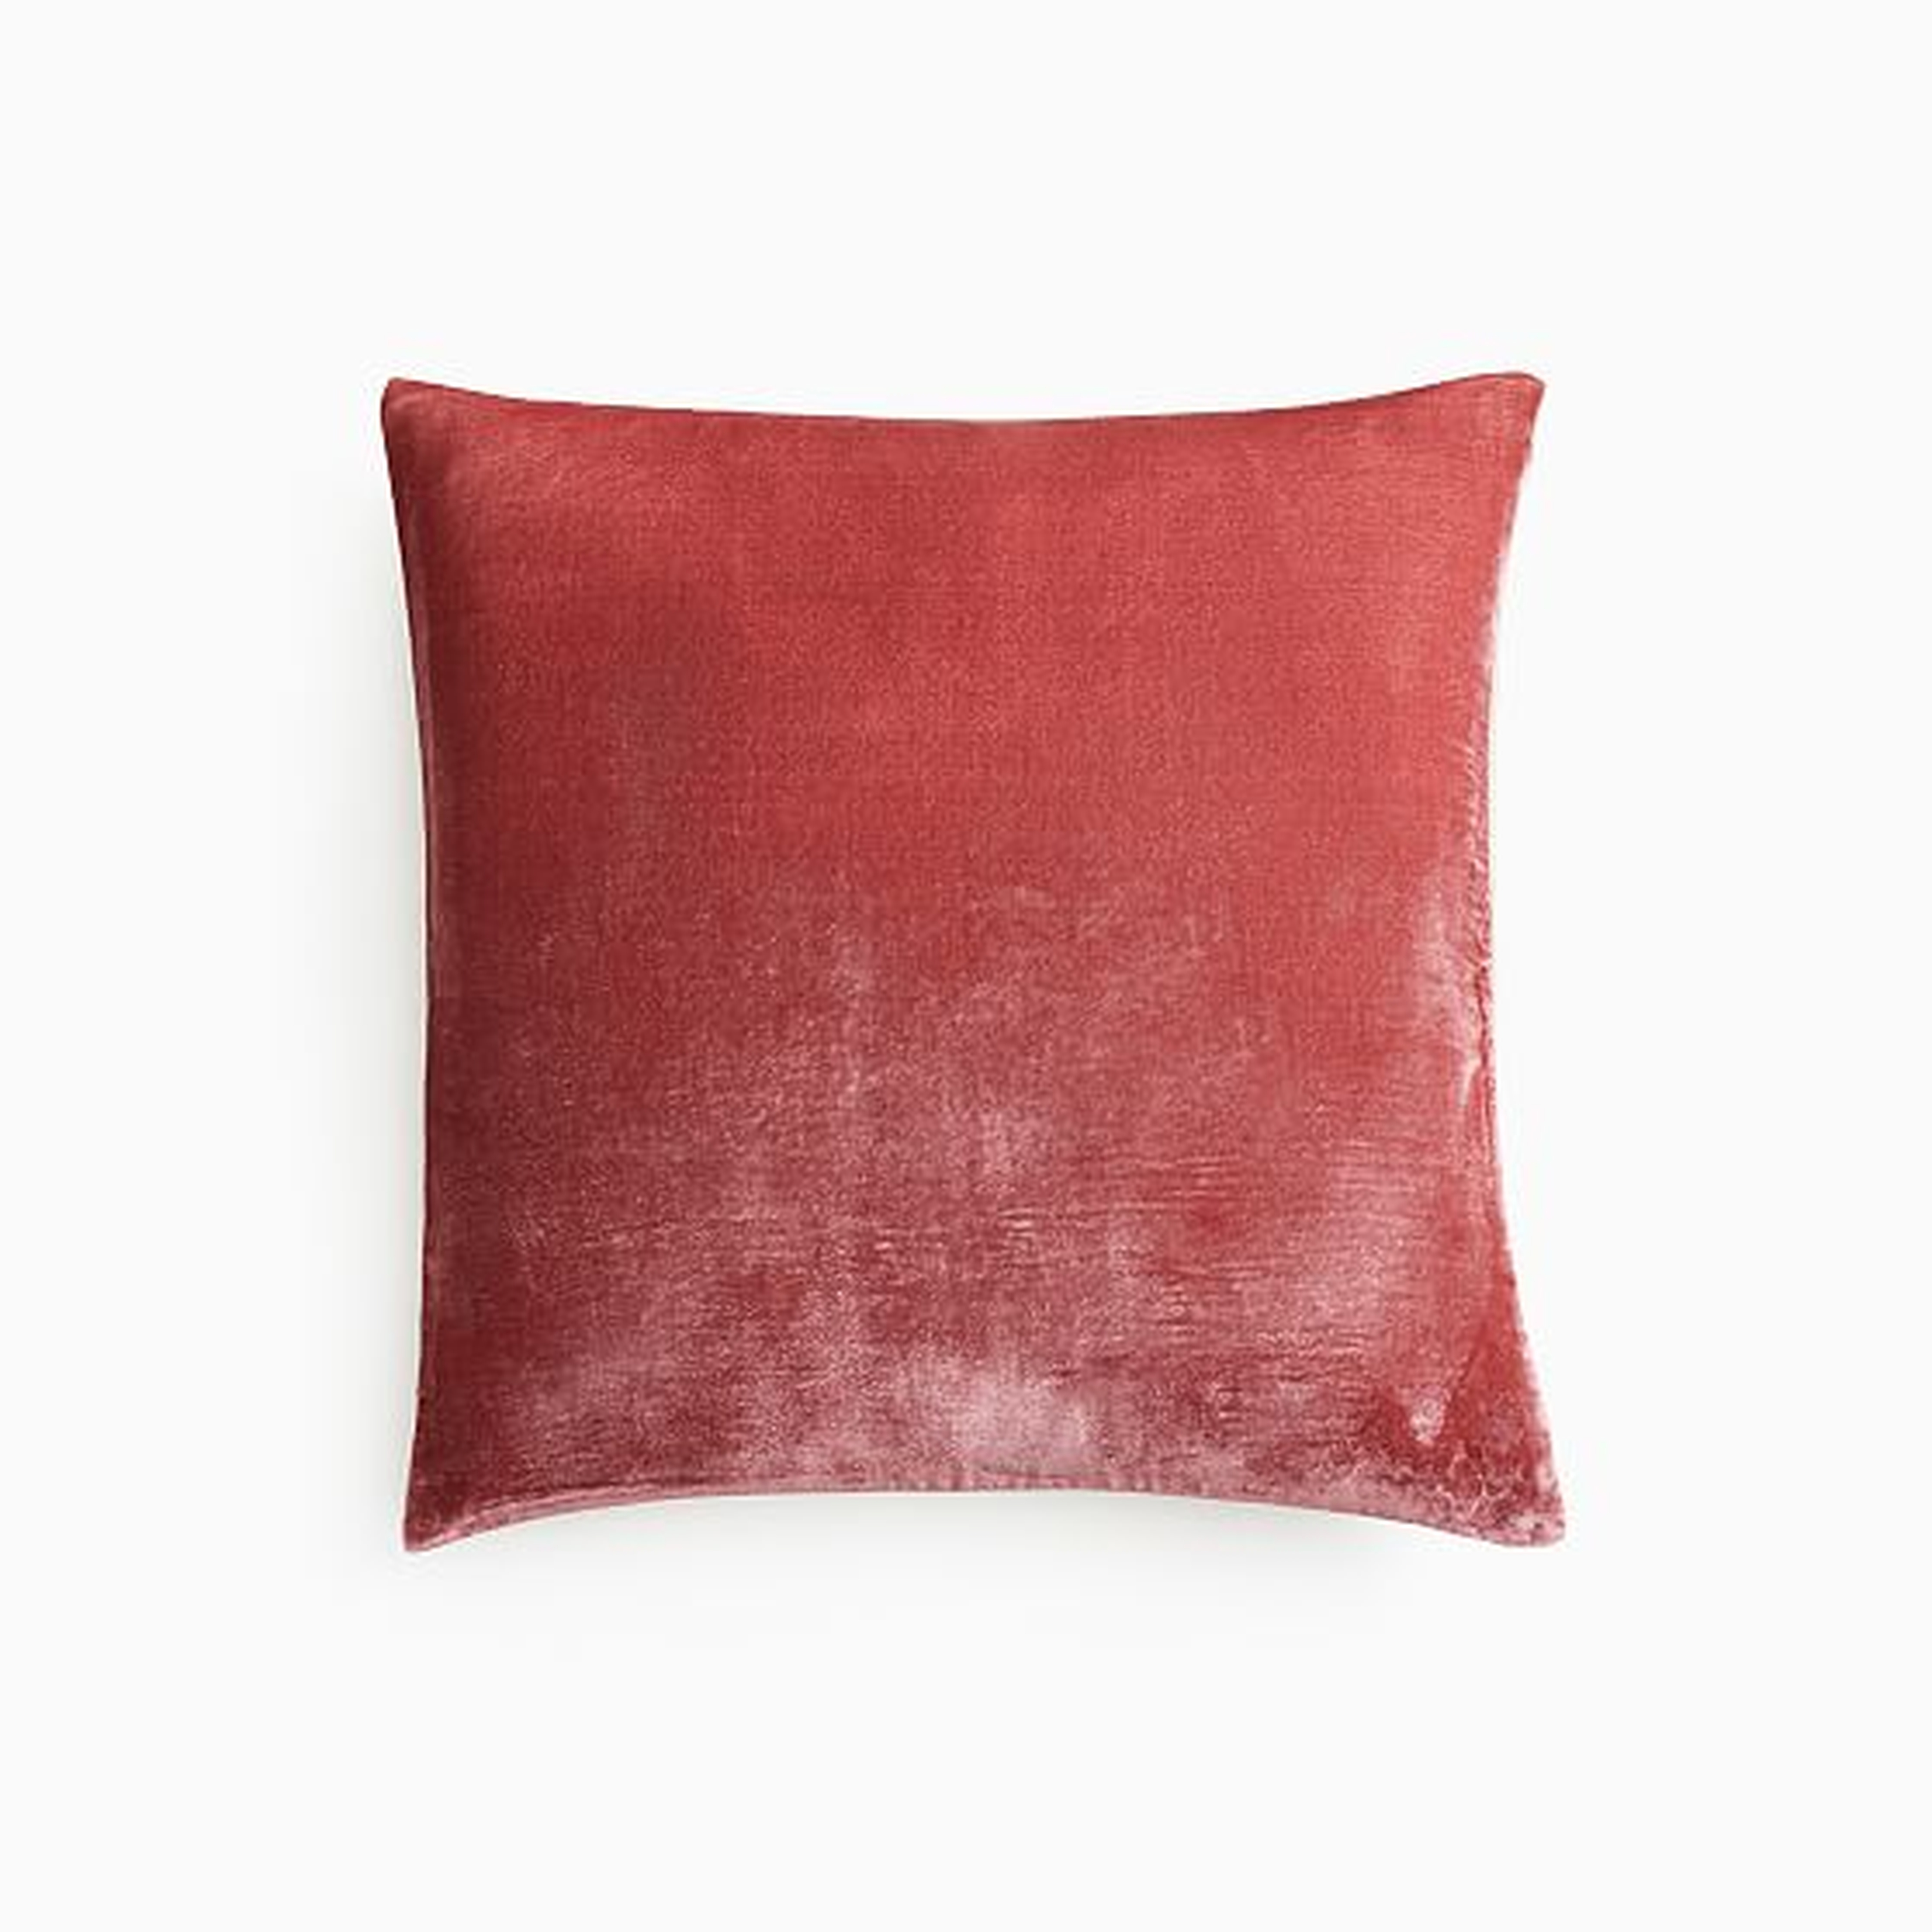 Lush Velvet Pillow Cover, 18"x18", Washed Ruby - West Elm